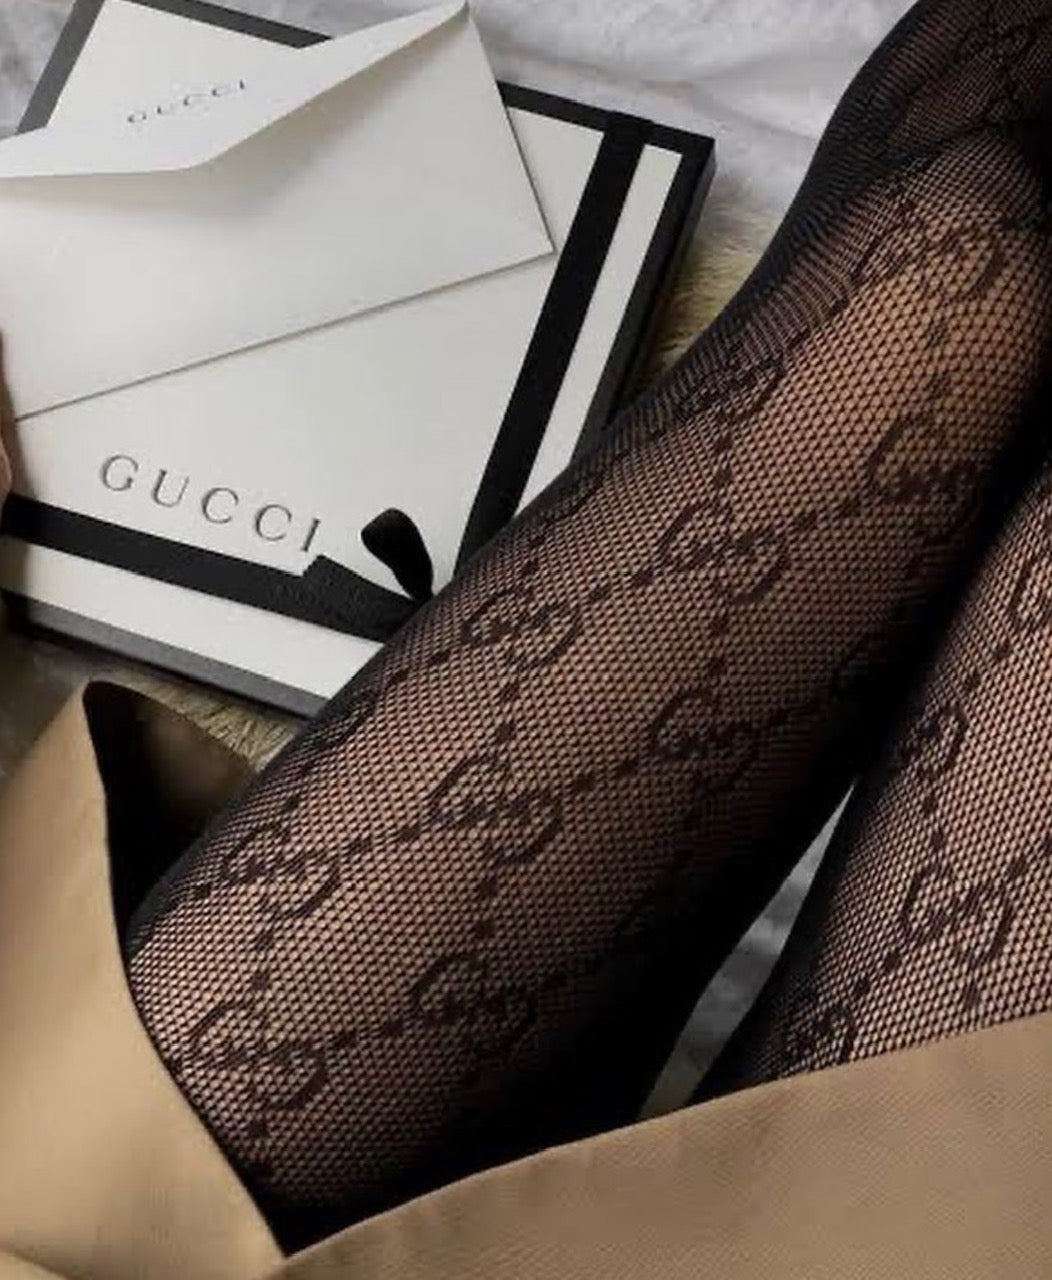 GUCCI Set: Bandeau bra and briefs with gift box